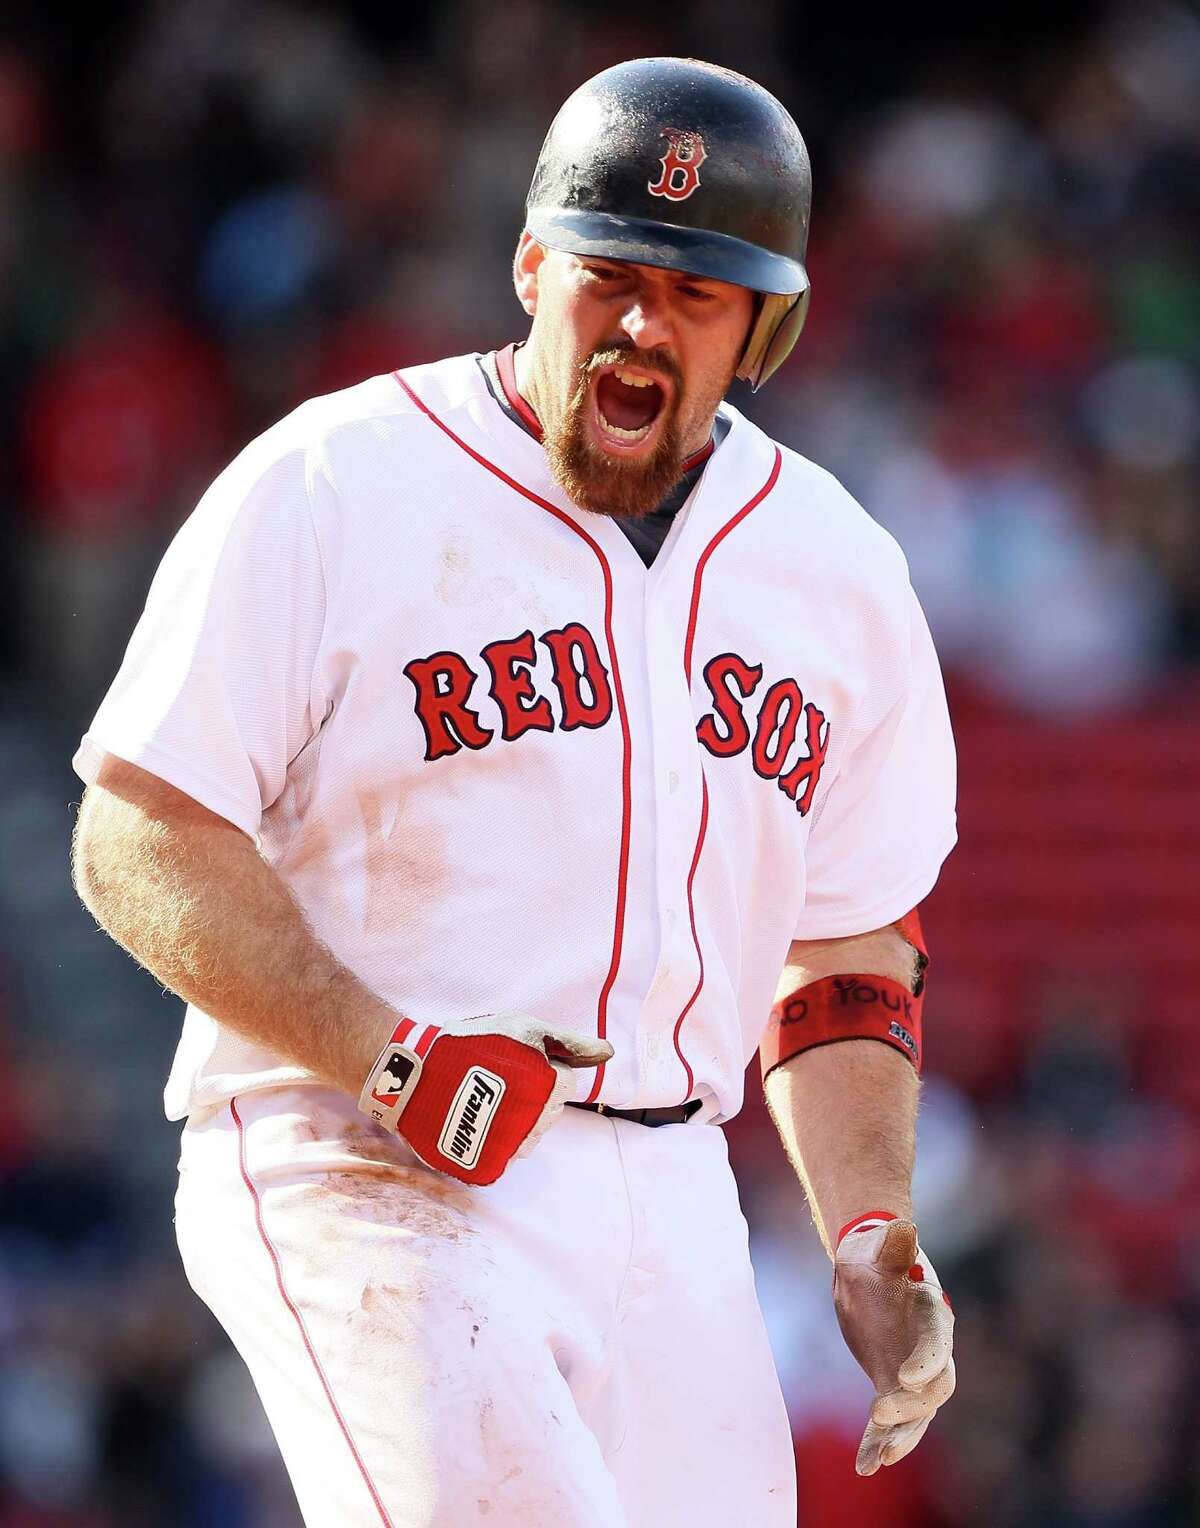 FILE - DECEMBER 11: According to reports, free agent third baseman Kevin Youkilis will sign with the New York Yankees for one year and $12 million, pending a physical. BOSTON, MA - MAY 05: Kevin Youkilis #20 of the Boston Red Sox reacts after flying out in the eighth inning against the Los Angeles Angels on May 5, 2011 at Fenway Park in Boston, Massachusetts. The Los Angeles Angels defeated the Boston Red Sox 11-0. (Photo by Elsa/Getty Images)